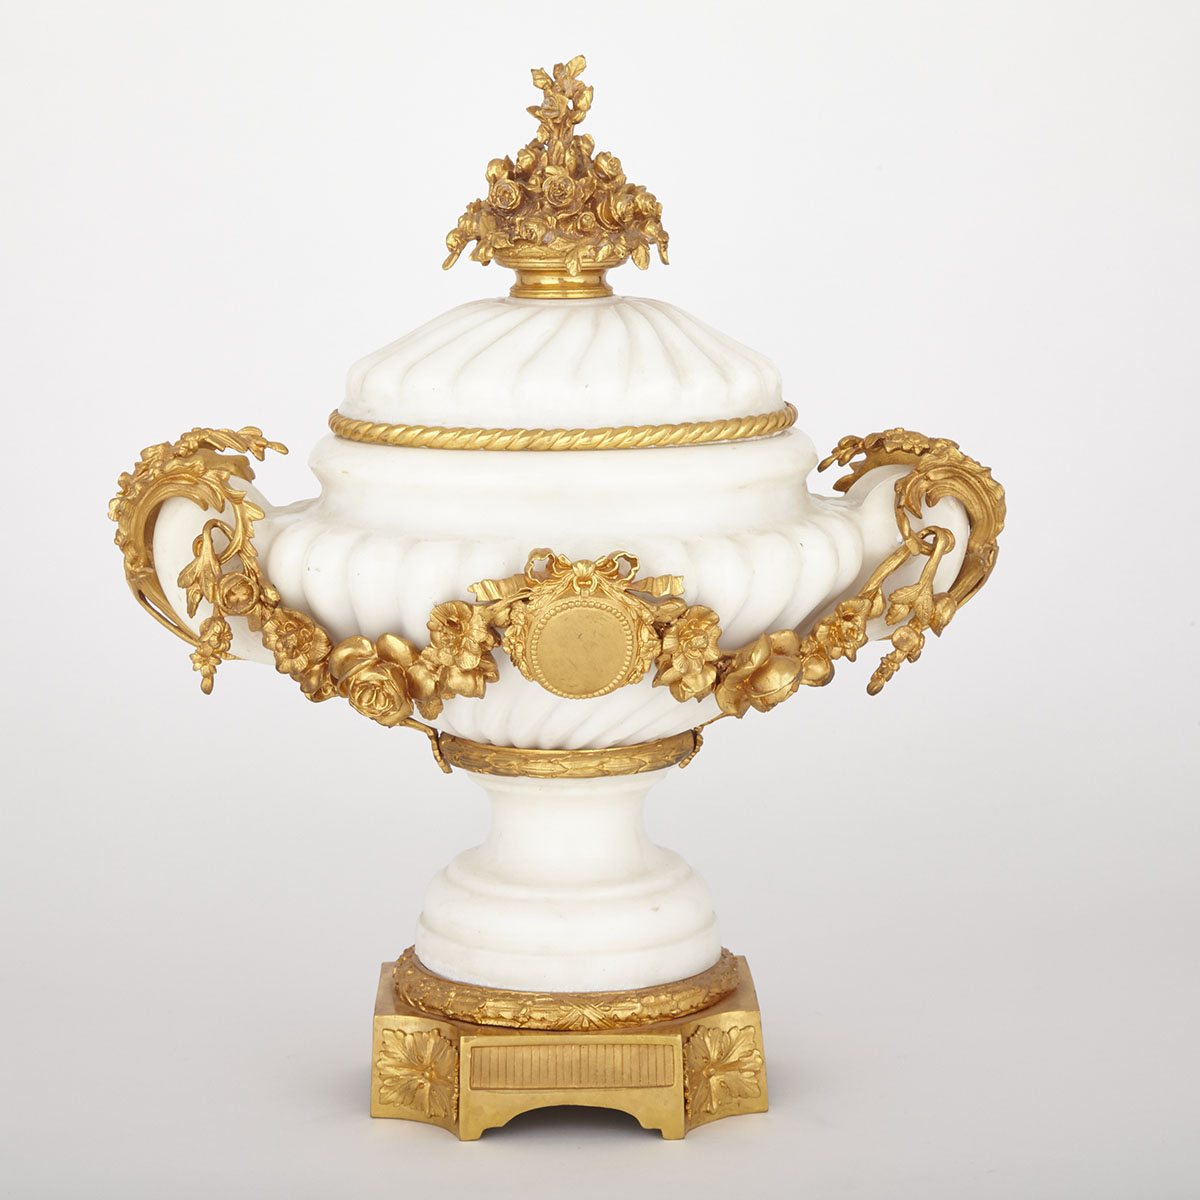 French Ormolu Mounted White Marble Covered Urn, 19th century